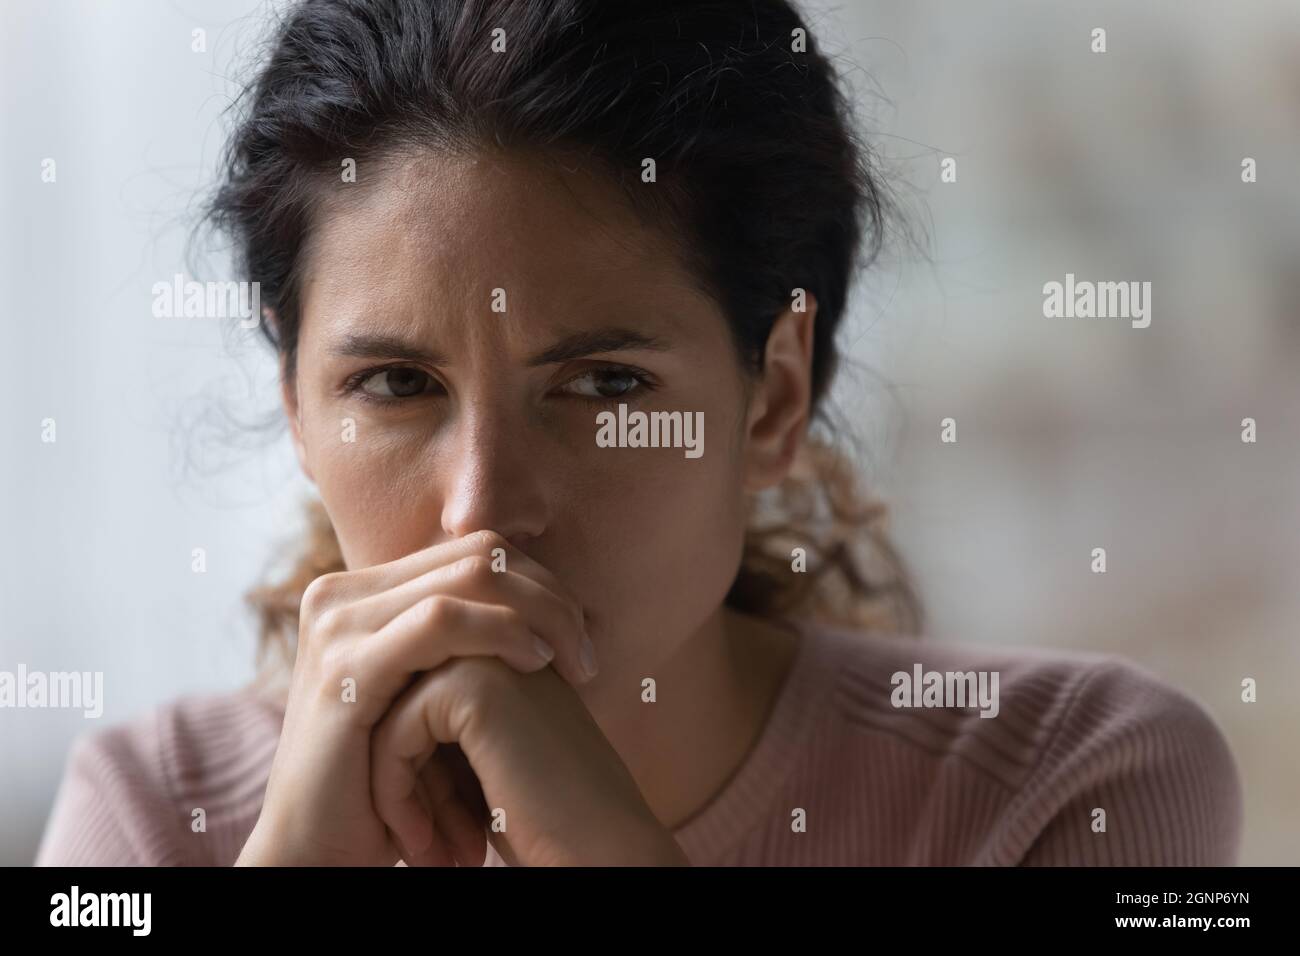 Sad young woman look in distance thinking Stock Photo